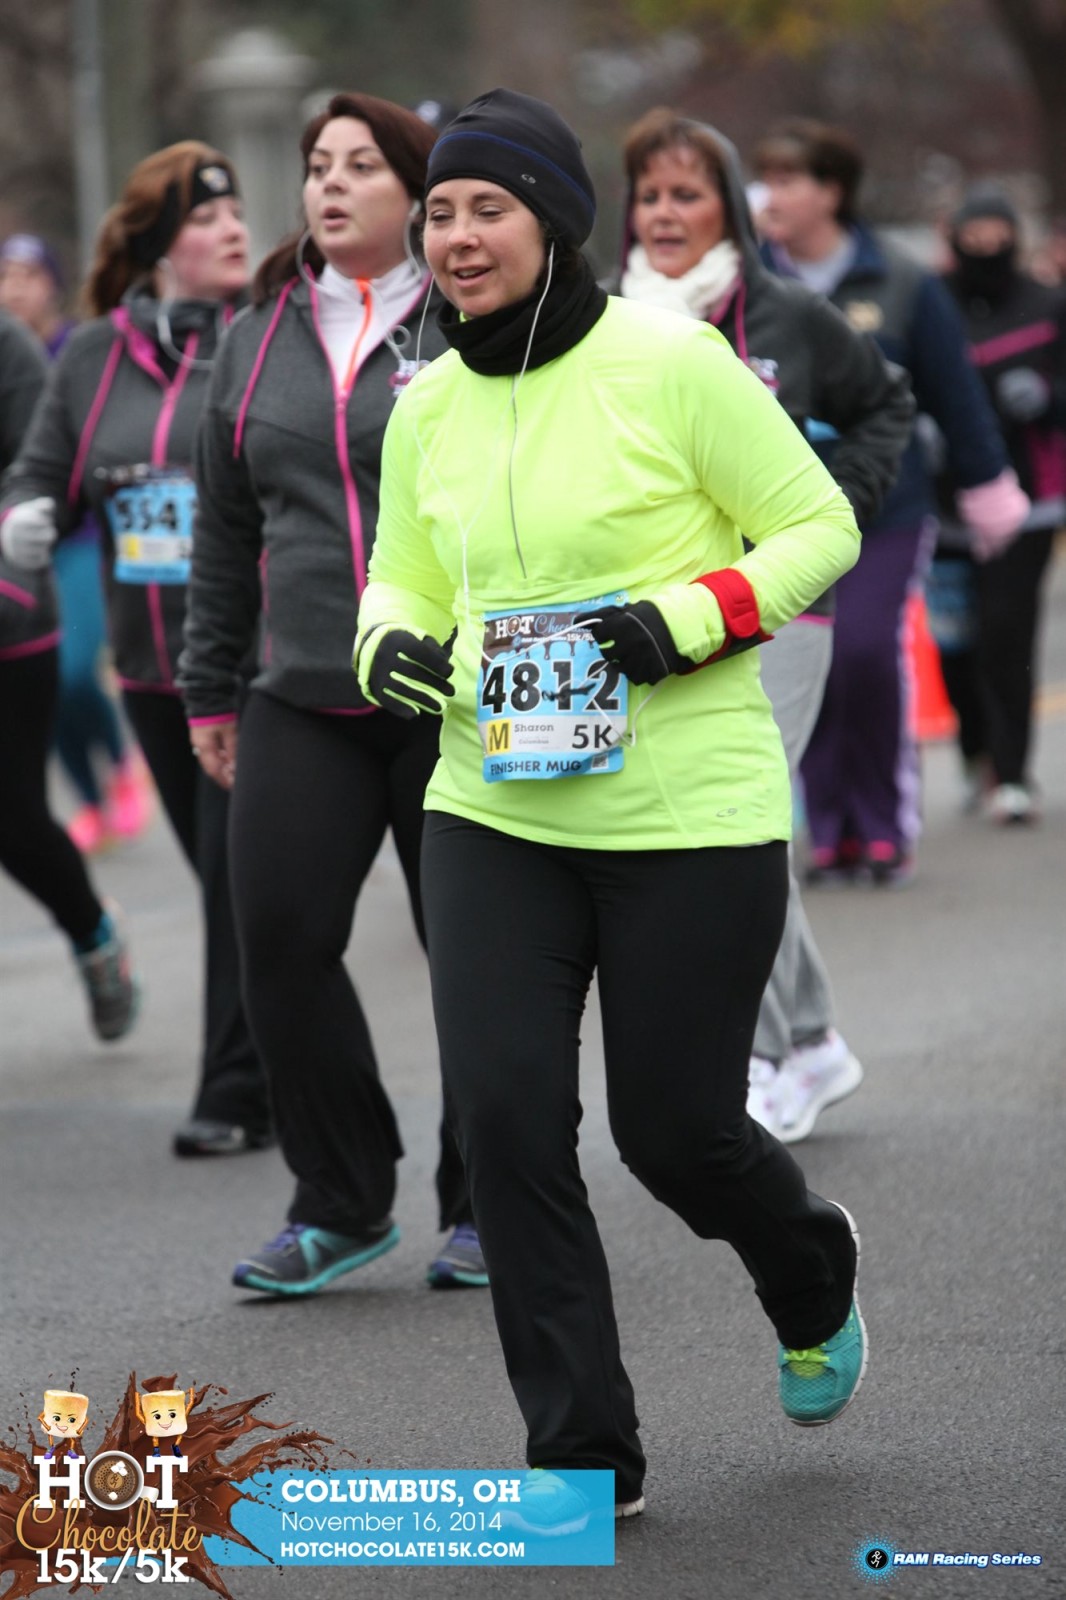 Running the Hot Chocolate 5K|Sharon the Moments Blog